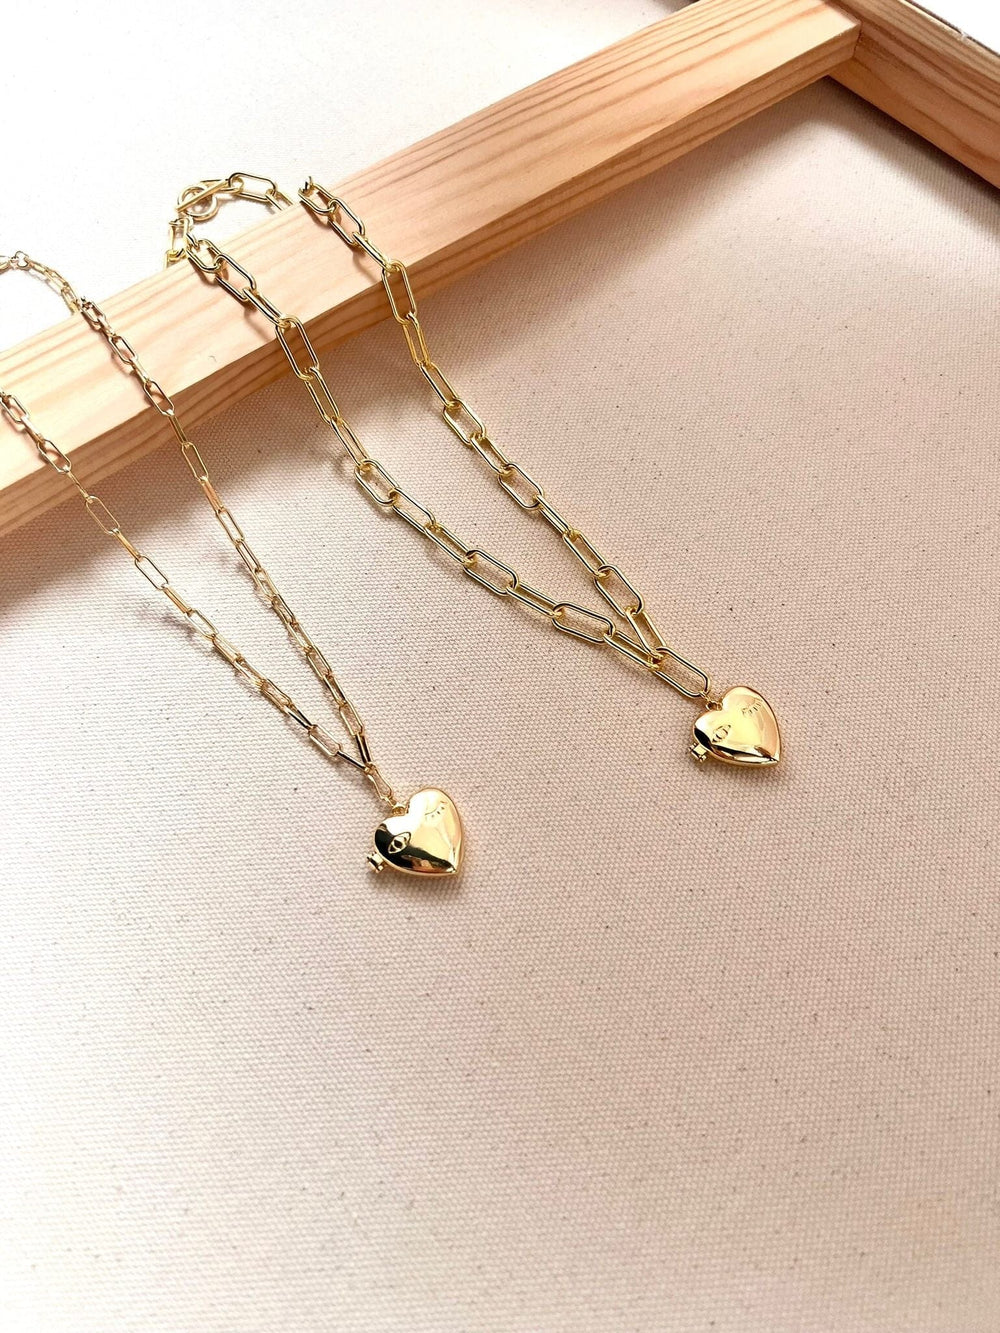 Wink Heart Locket Necklace Necklaces Style 1 - Medium paperclip chain short: 46cm (ca.18”) Necklace